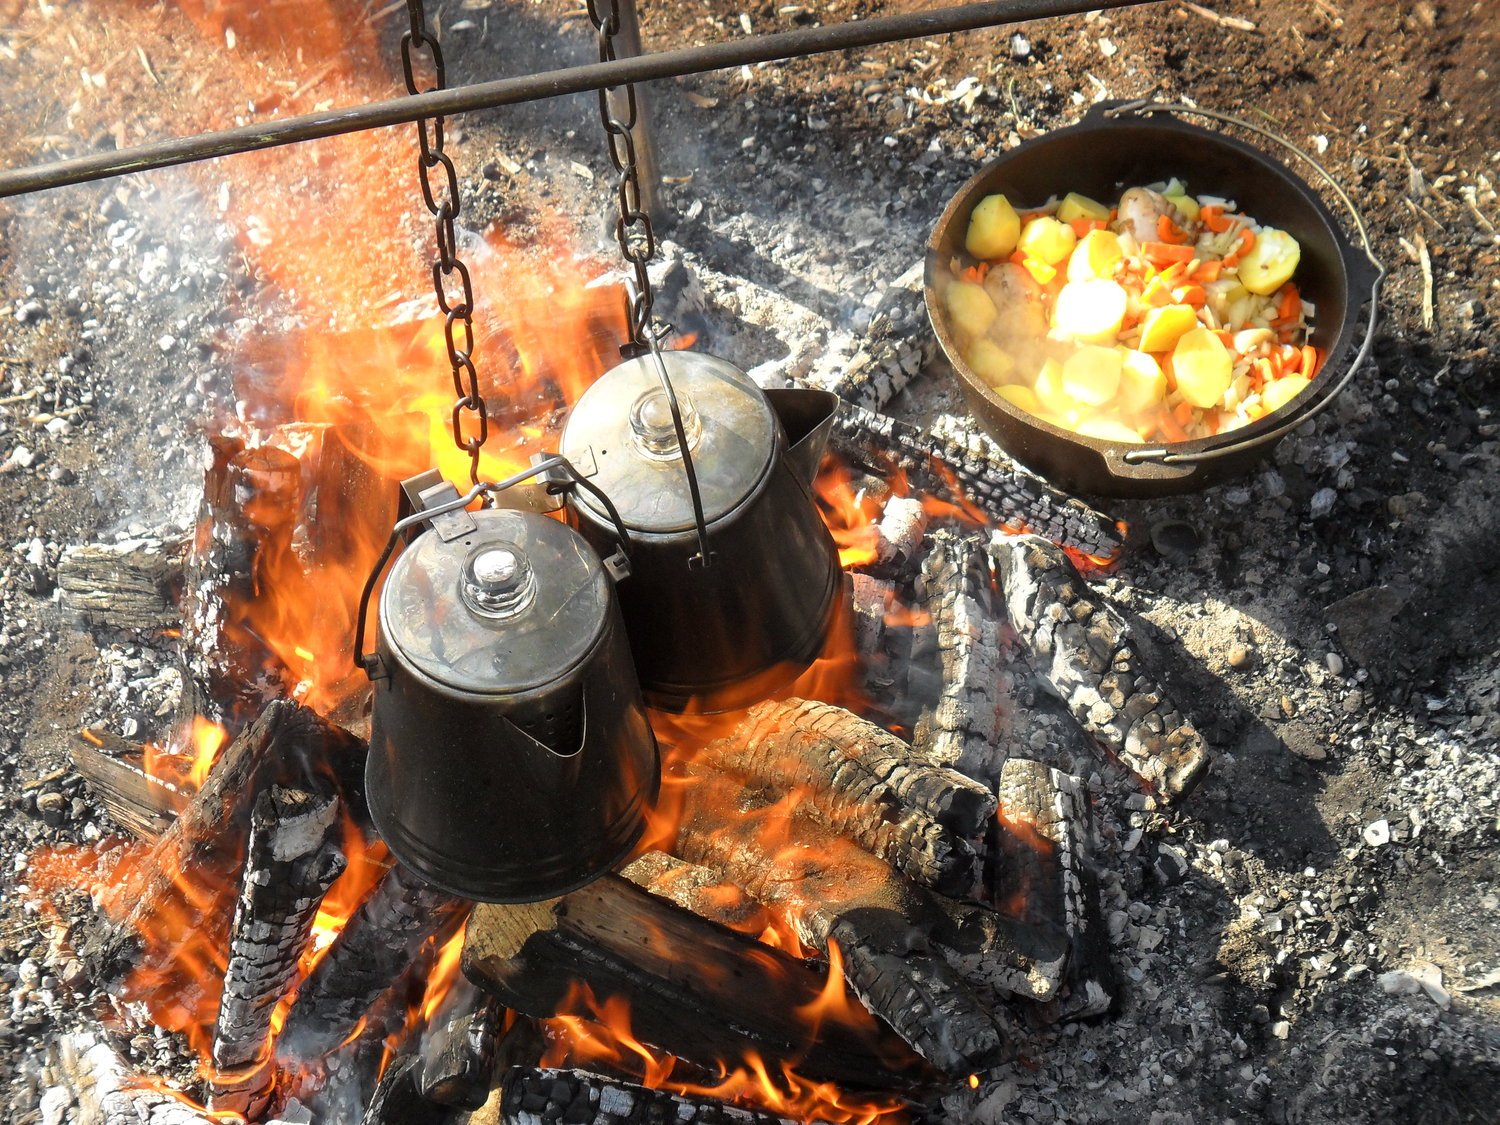 4 Tips for Camping When It's Cold